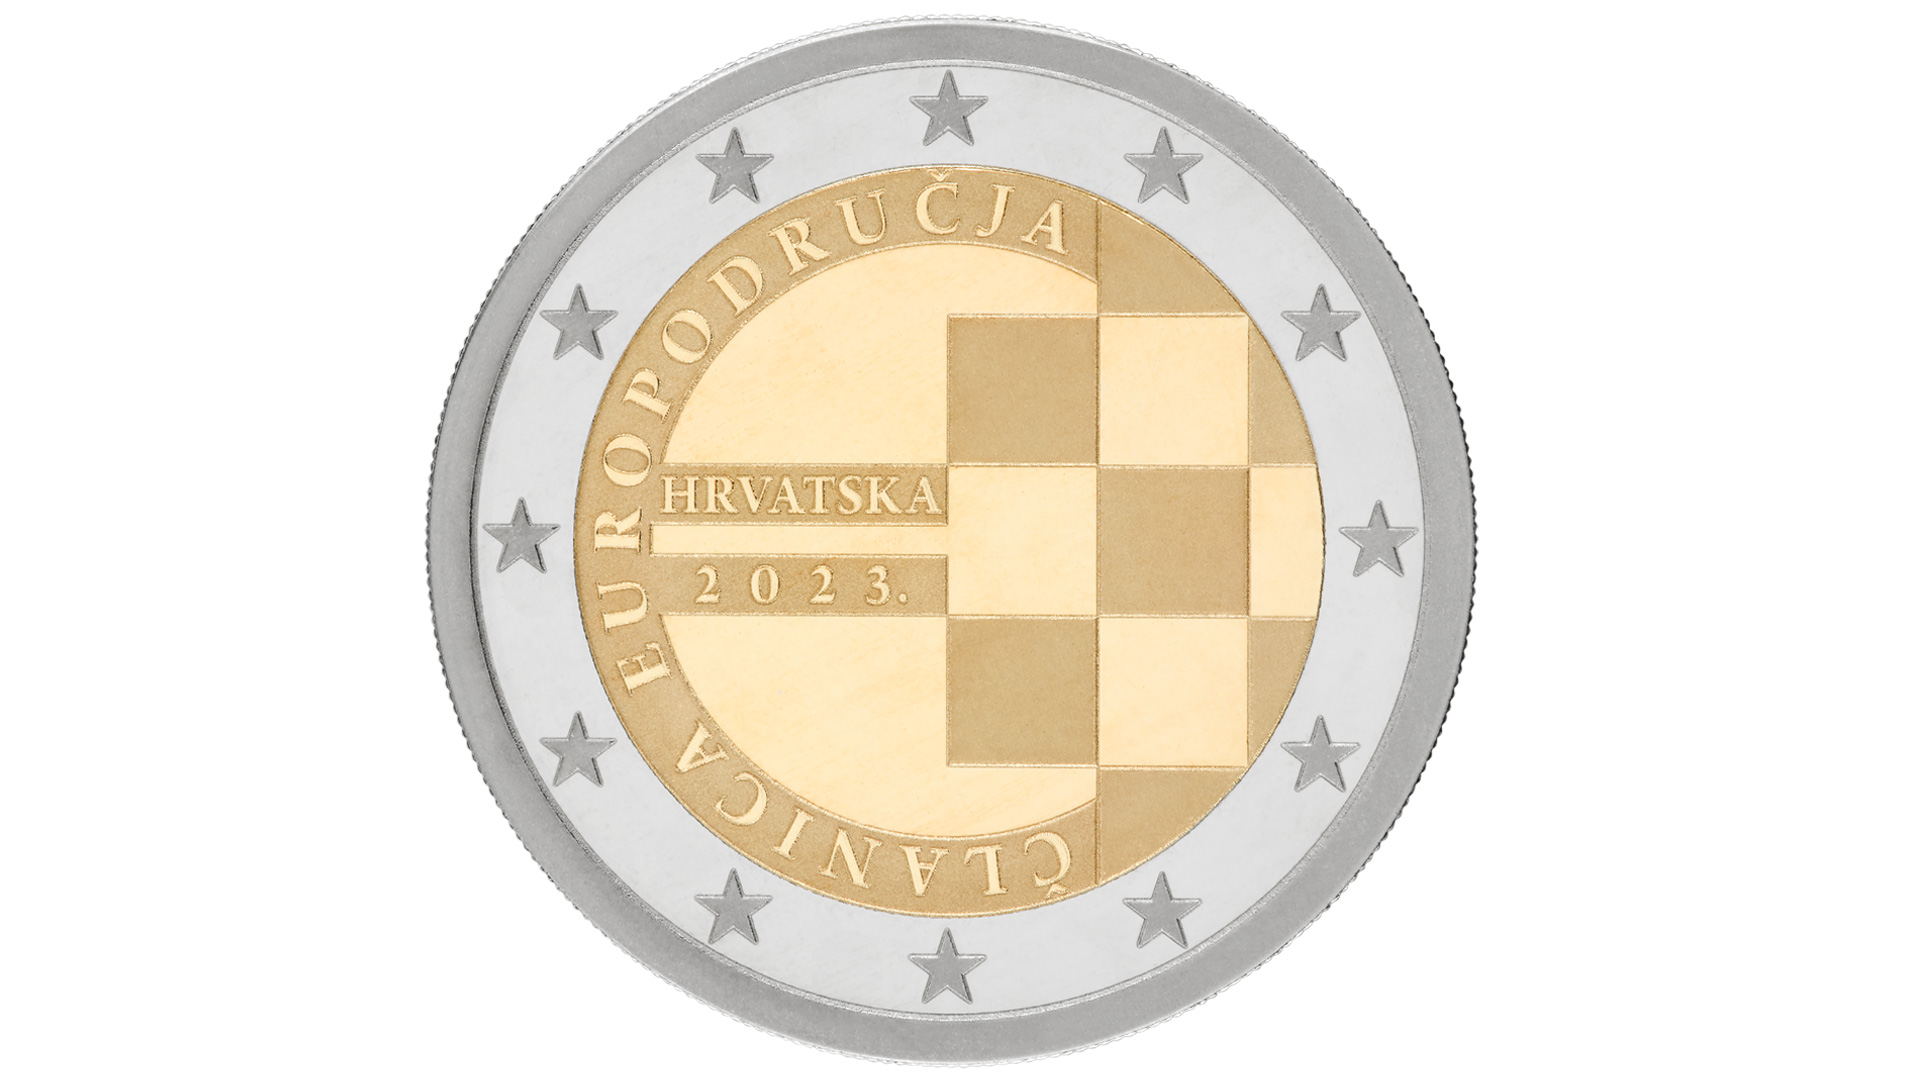 CNB issues the first commemorative 2-euro circulation coin